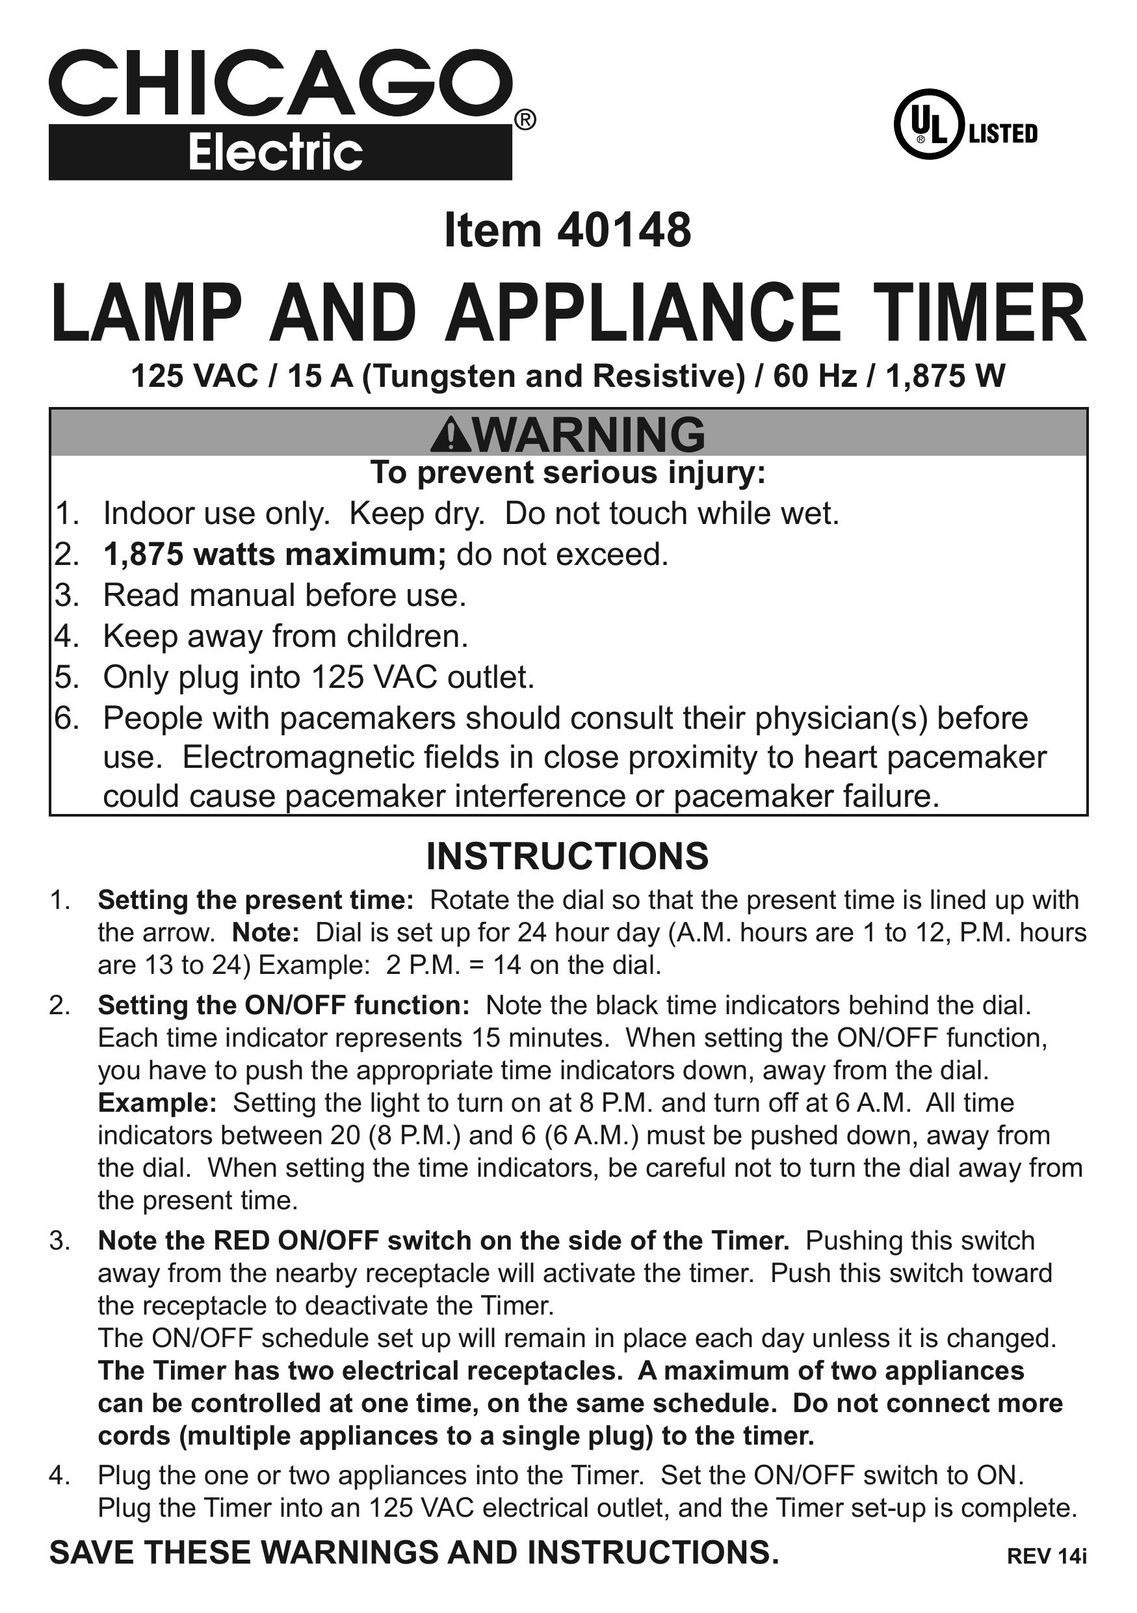 Chicago Electric 40148 Indoor Furnishings User Manual